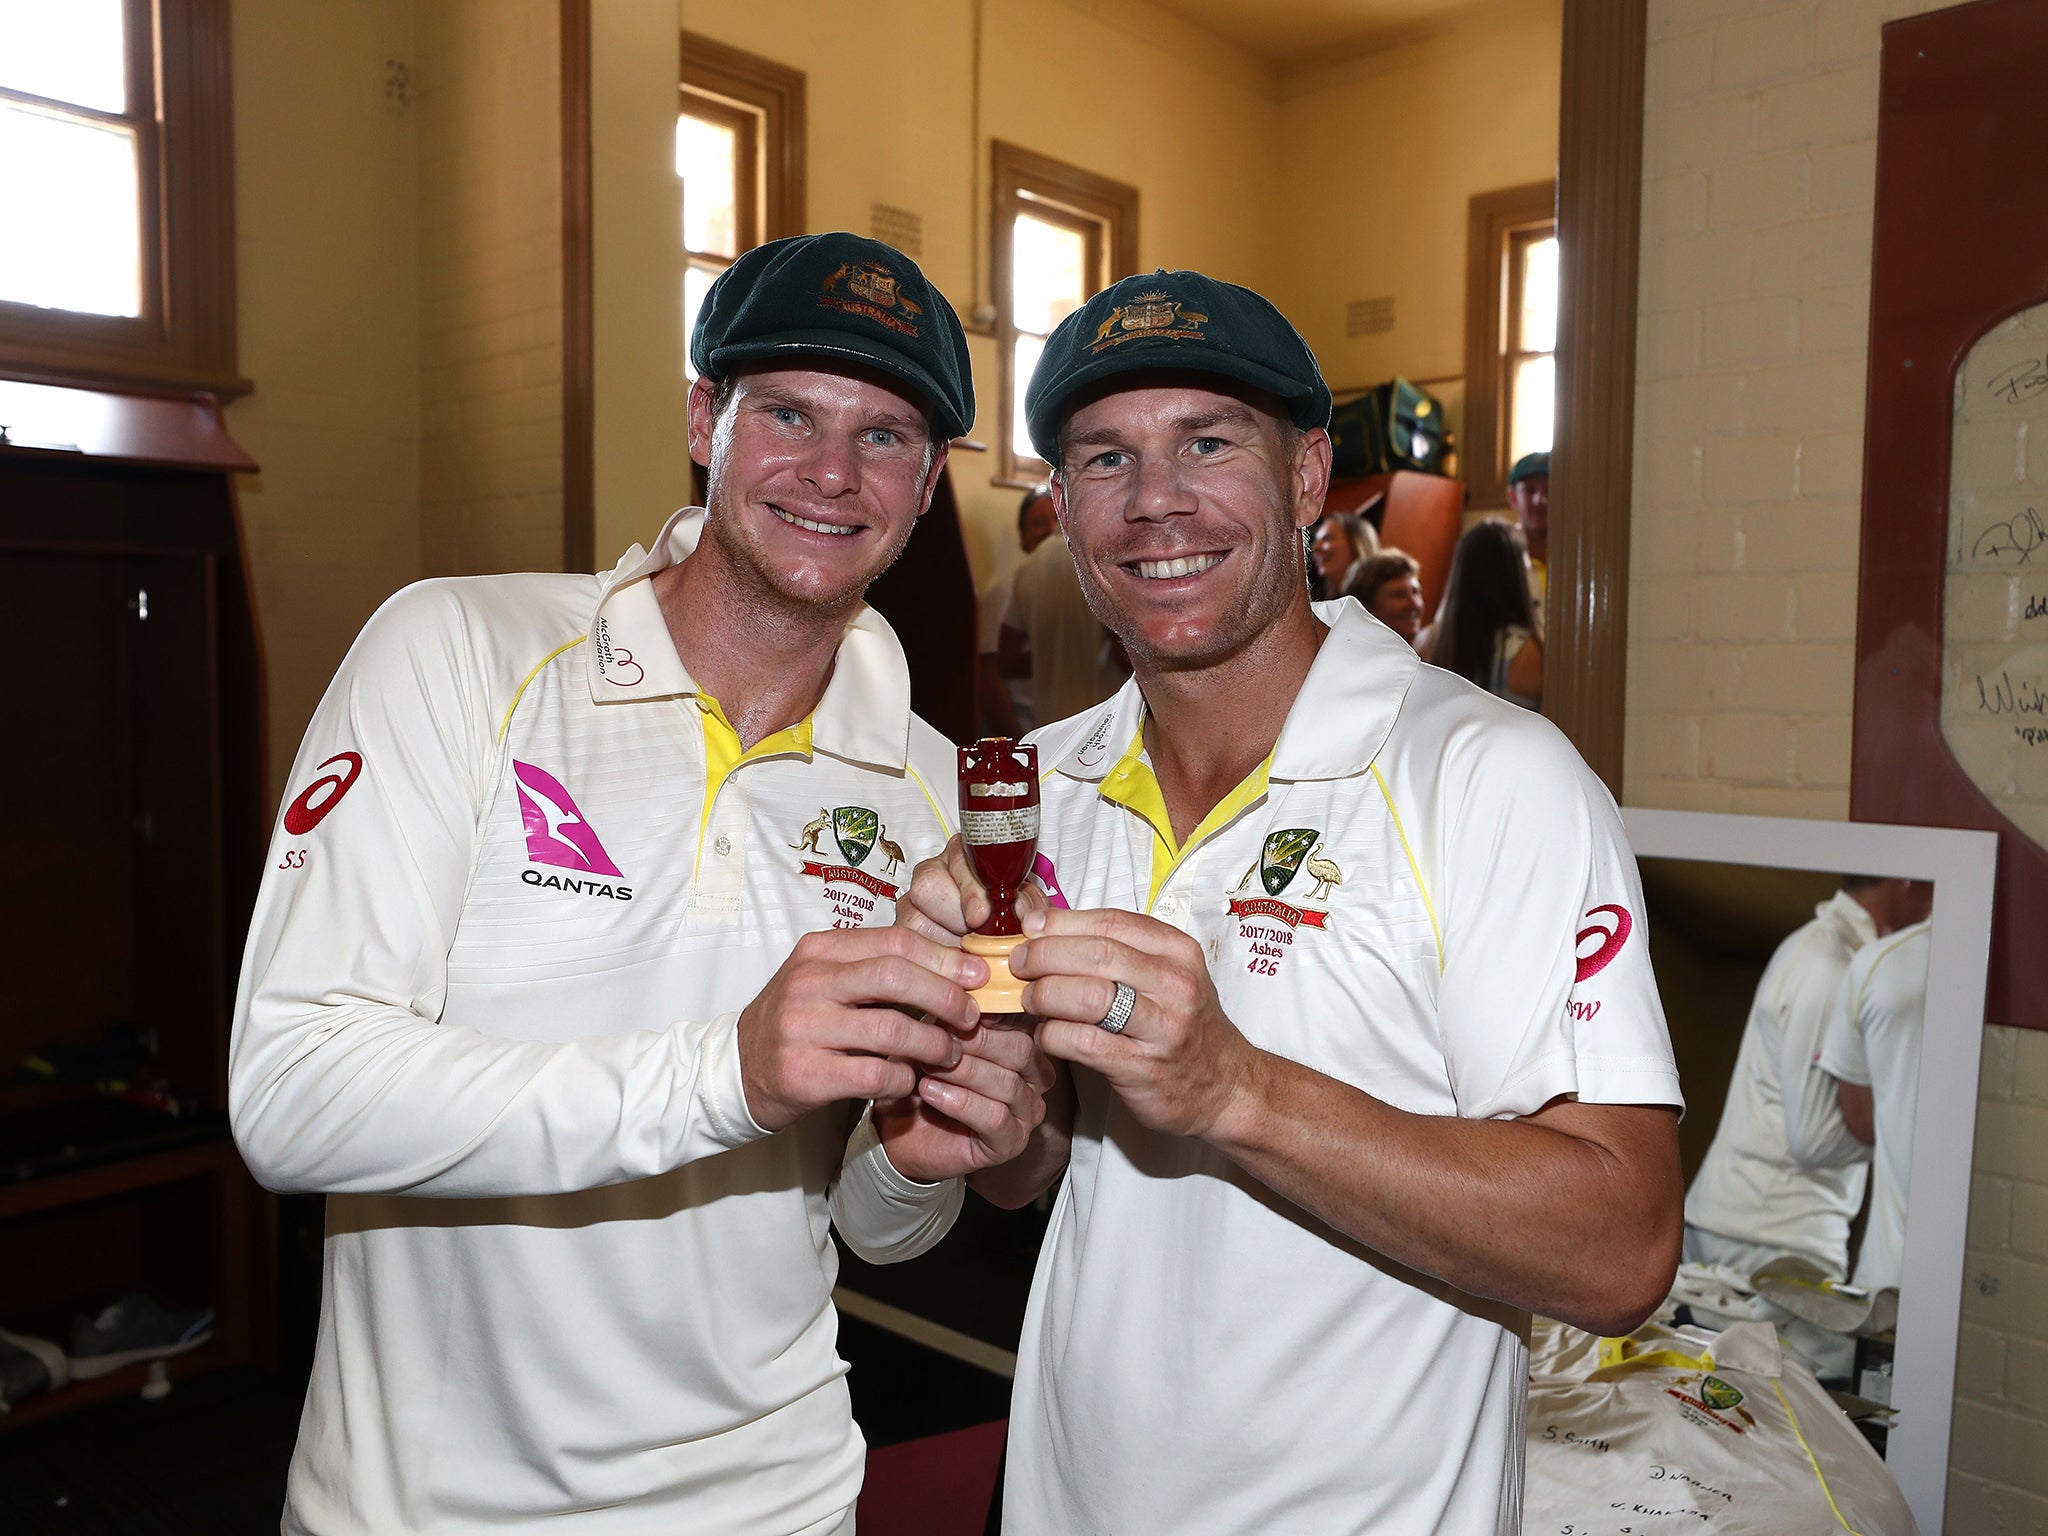 Smith and Warner could face each other on 10 November